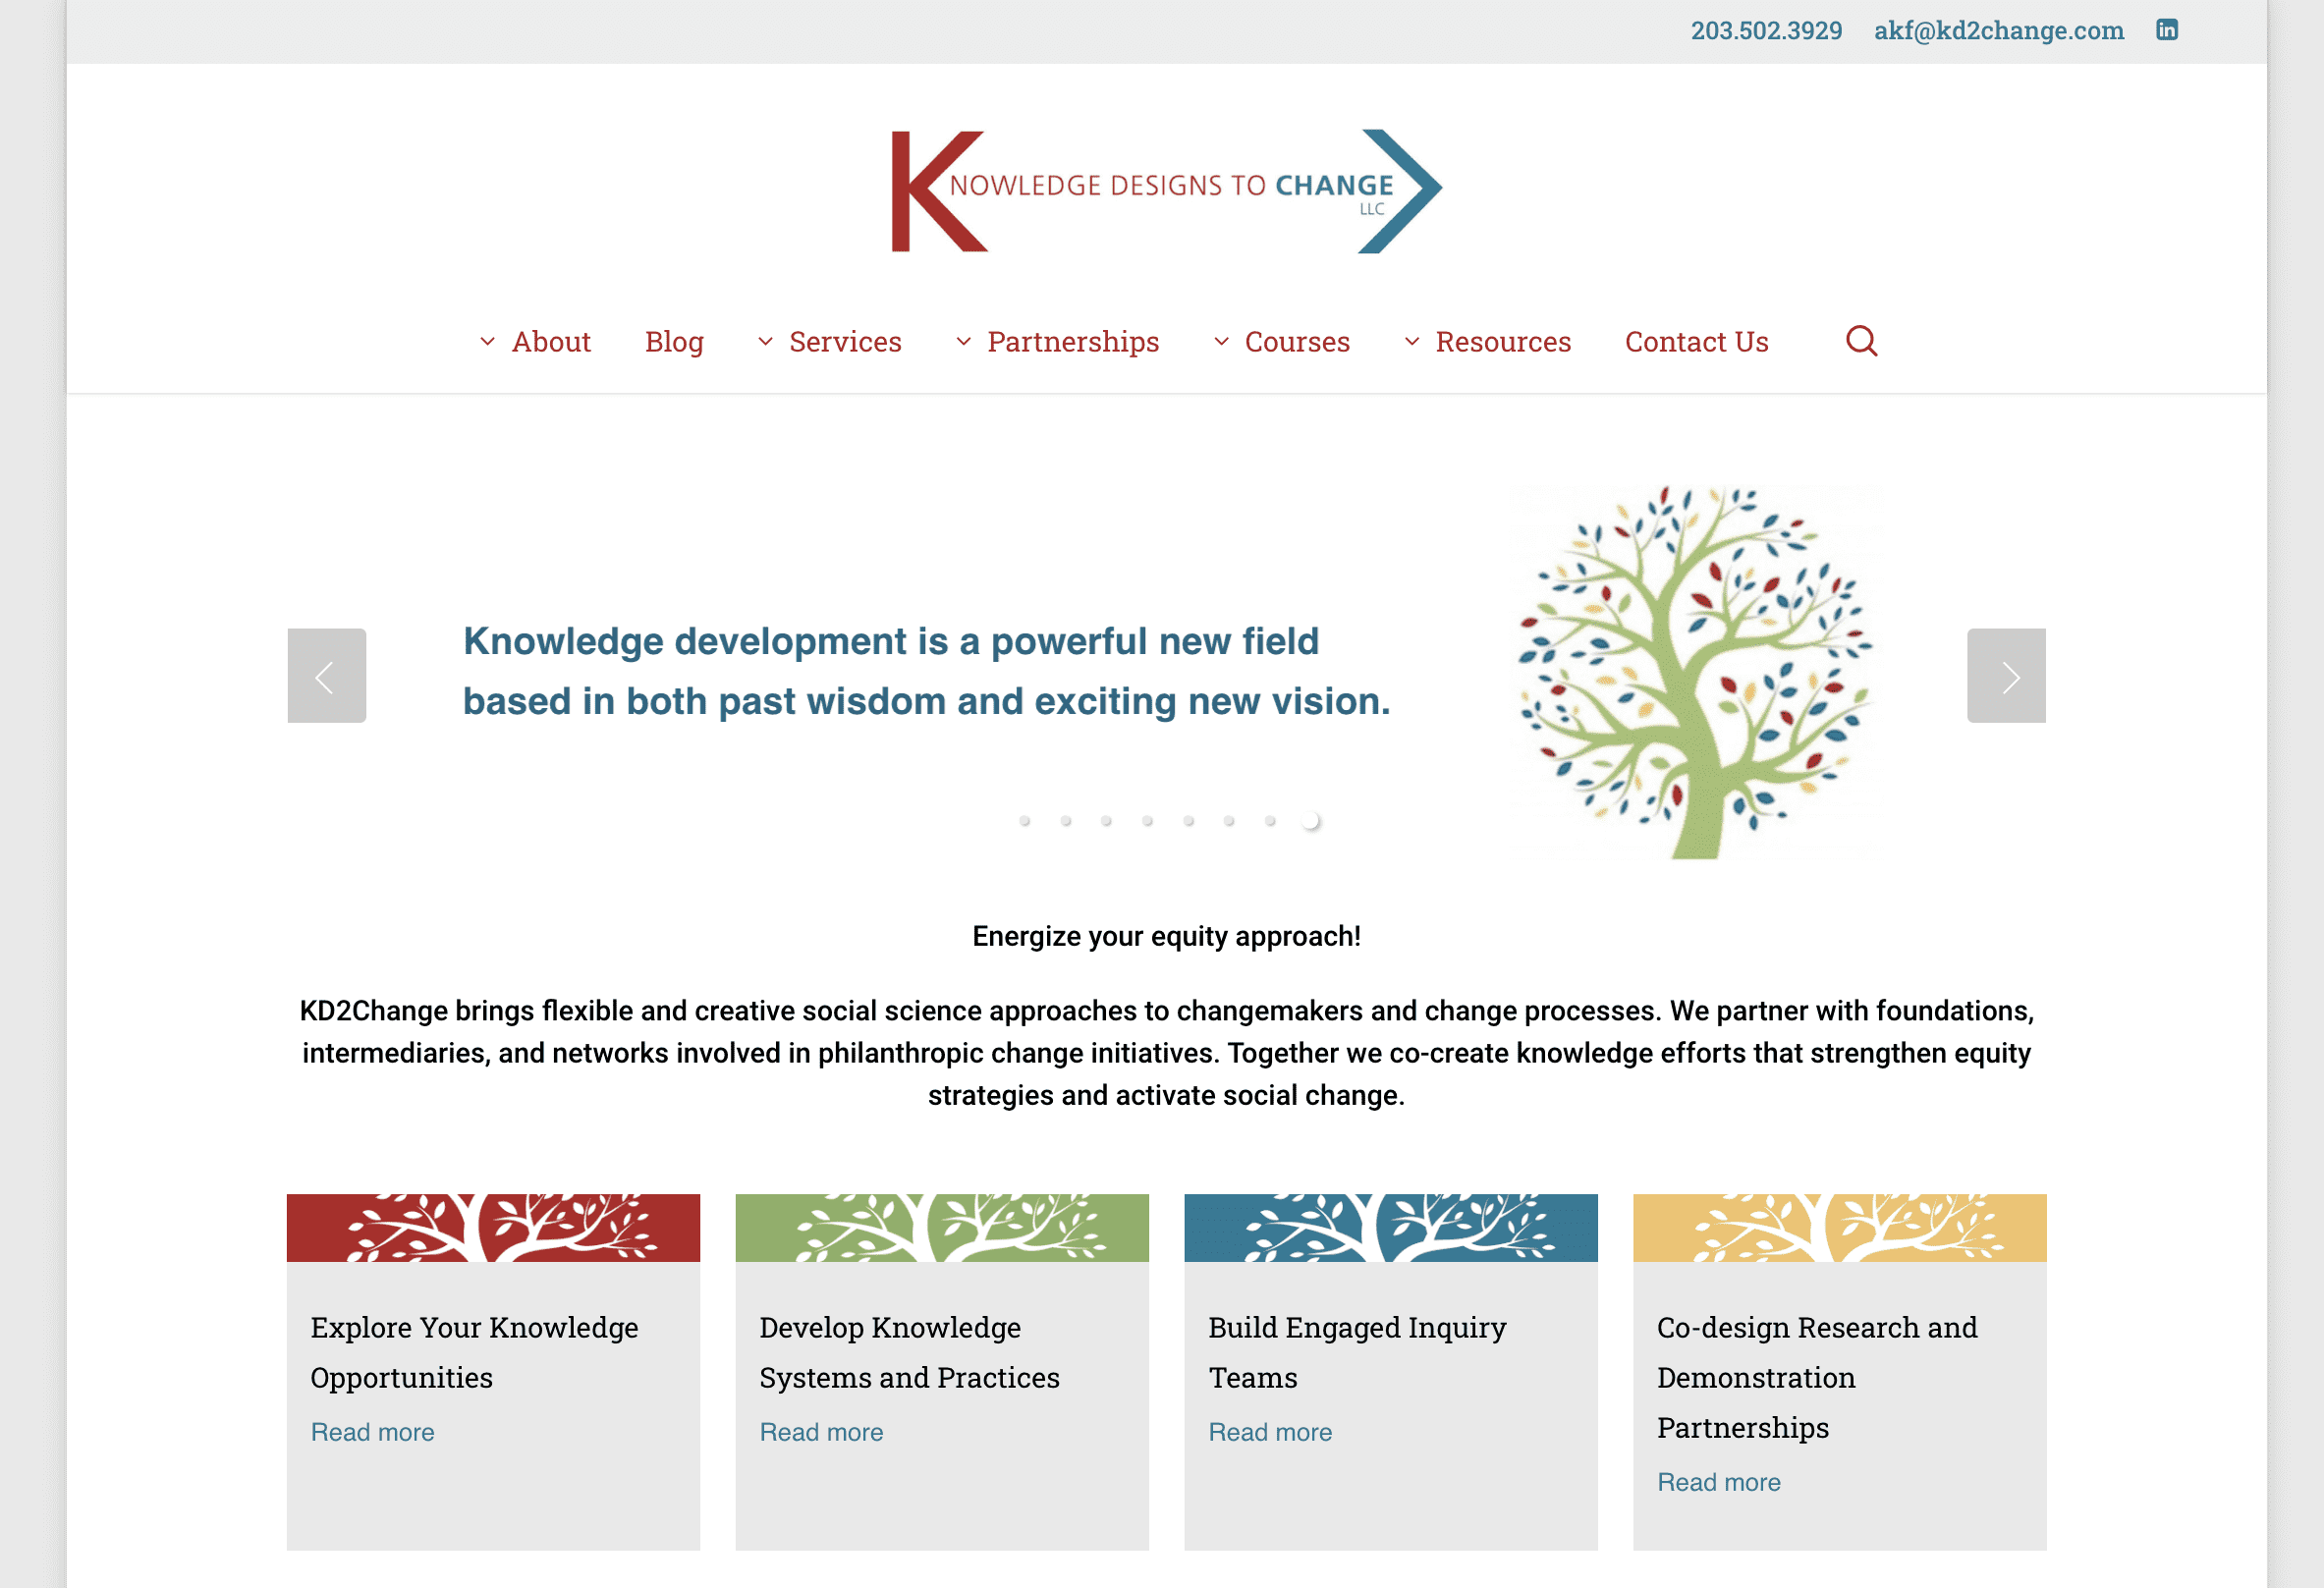 Knowledge Designs to Change